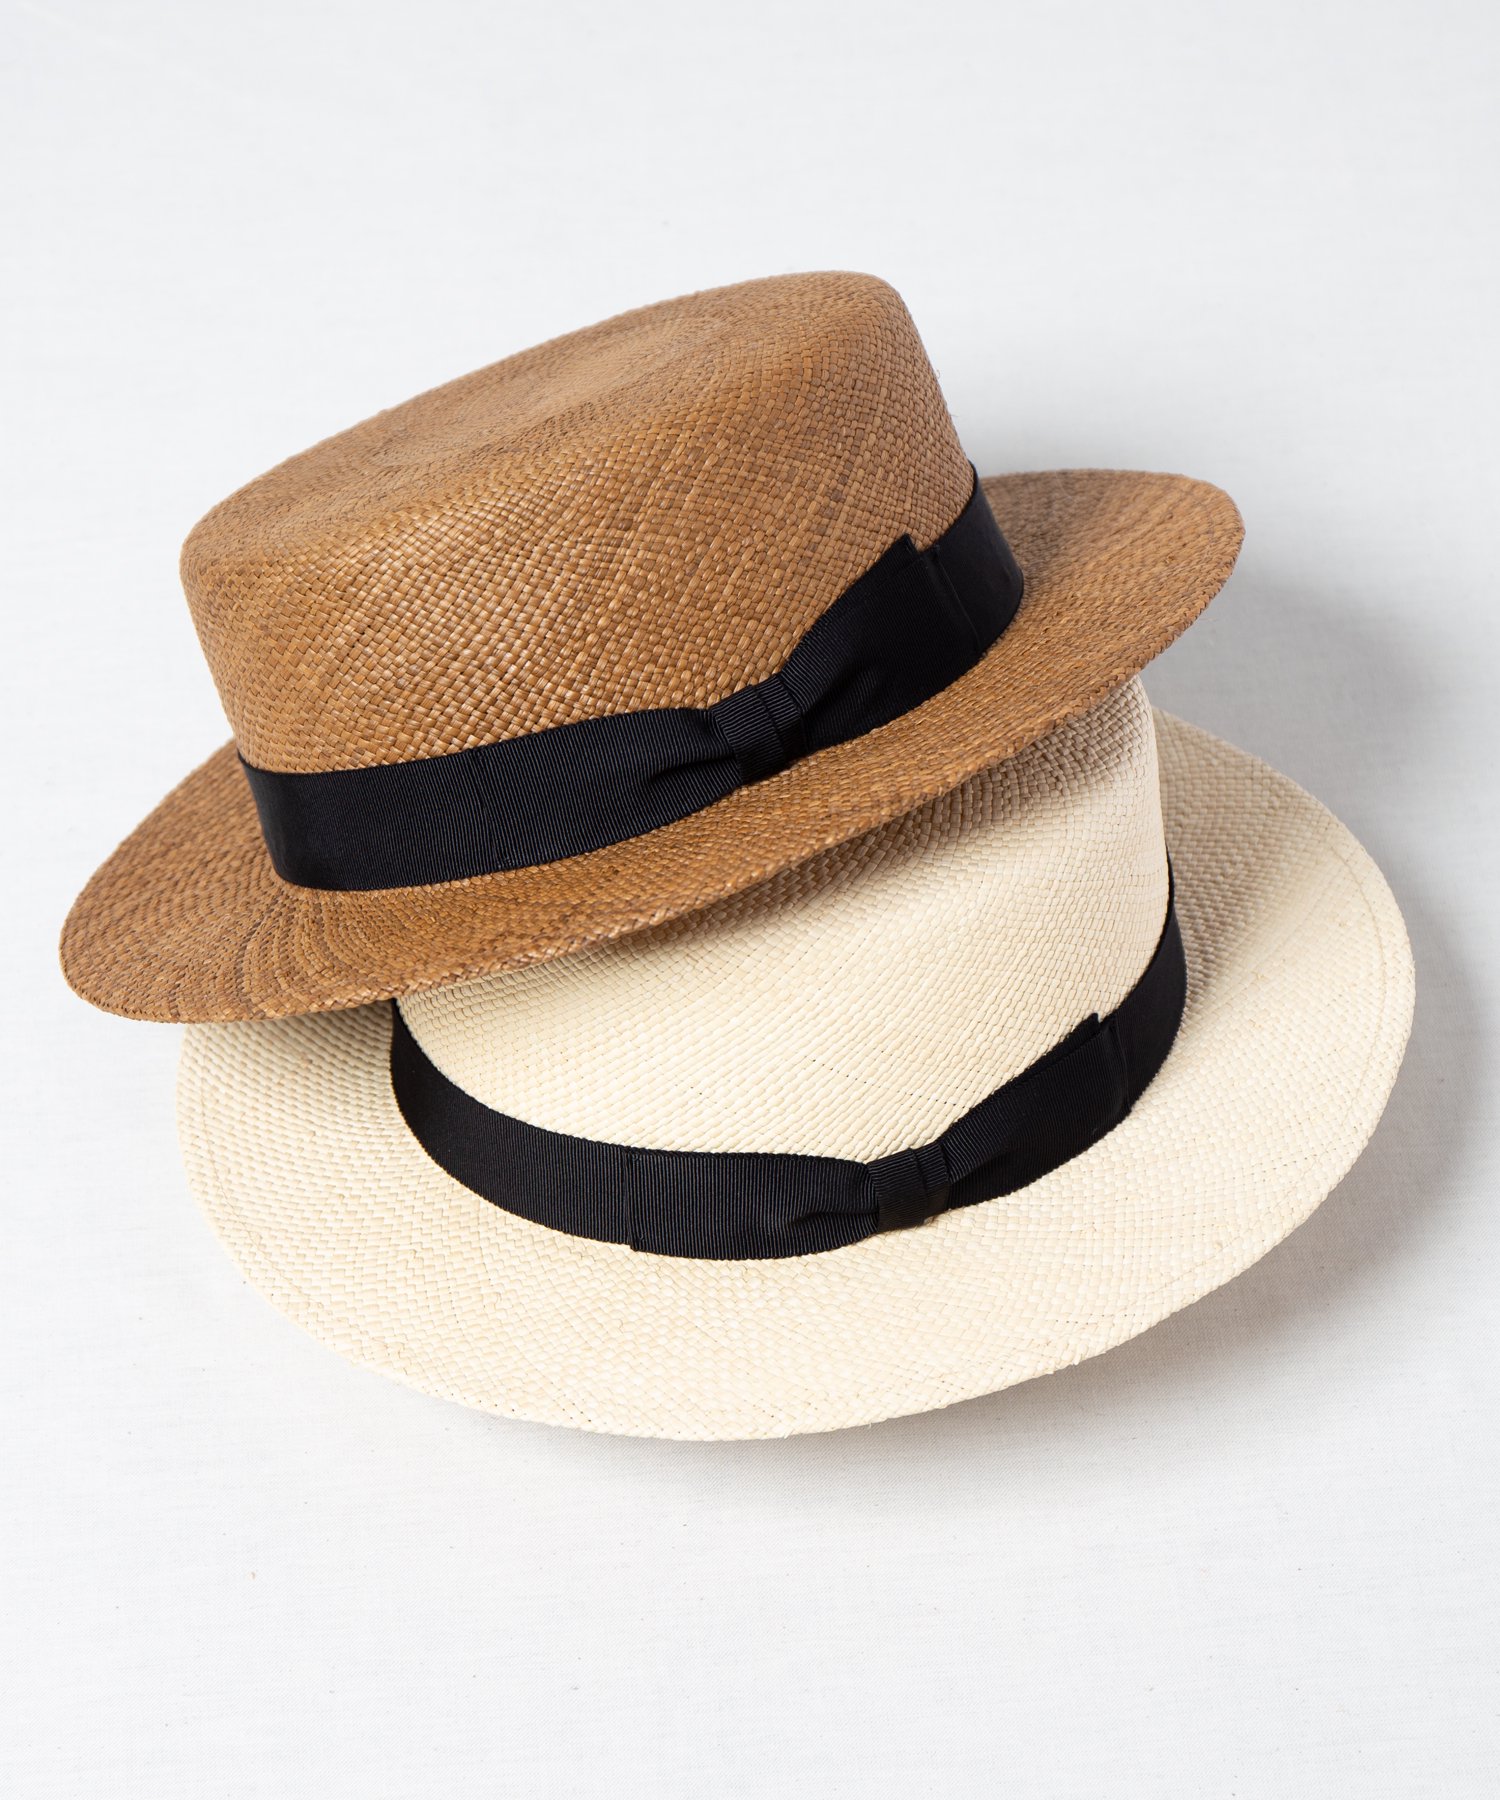 <img class='new_mark_img1' src='https://img.shop-pro.jp/img/new/icons15.gif' style='border:none;display:inline;margin:0px;padding:0px;width:auto;' />【Racal】  Panama Boater Hat / パナマ ボーター ハット　カンカン帽